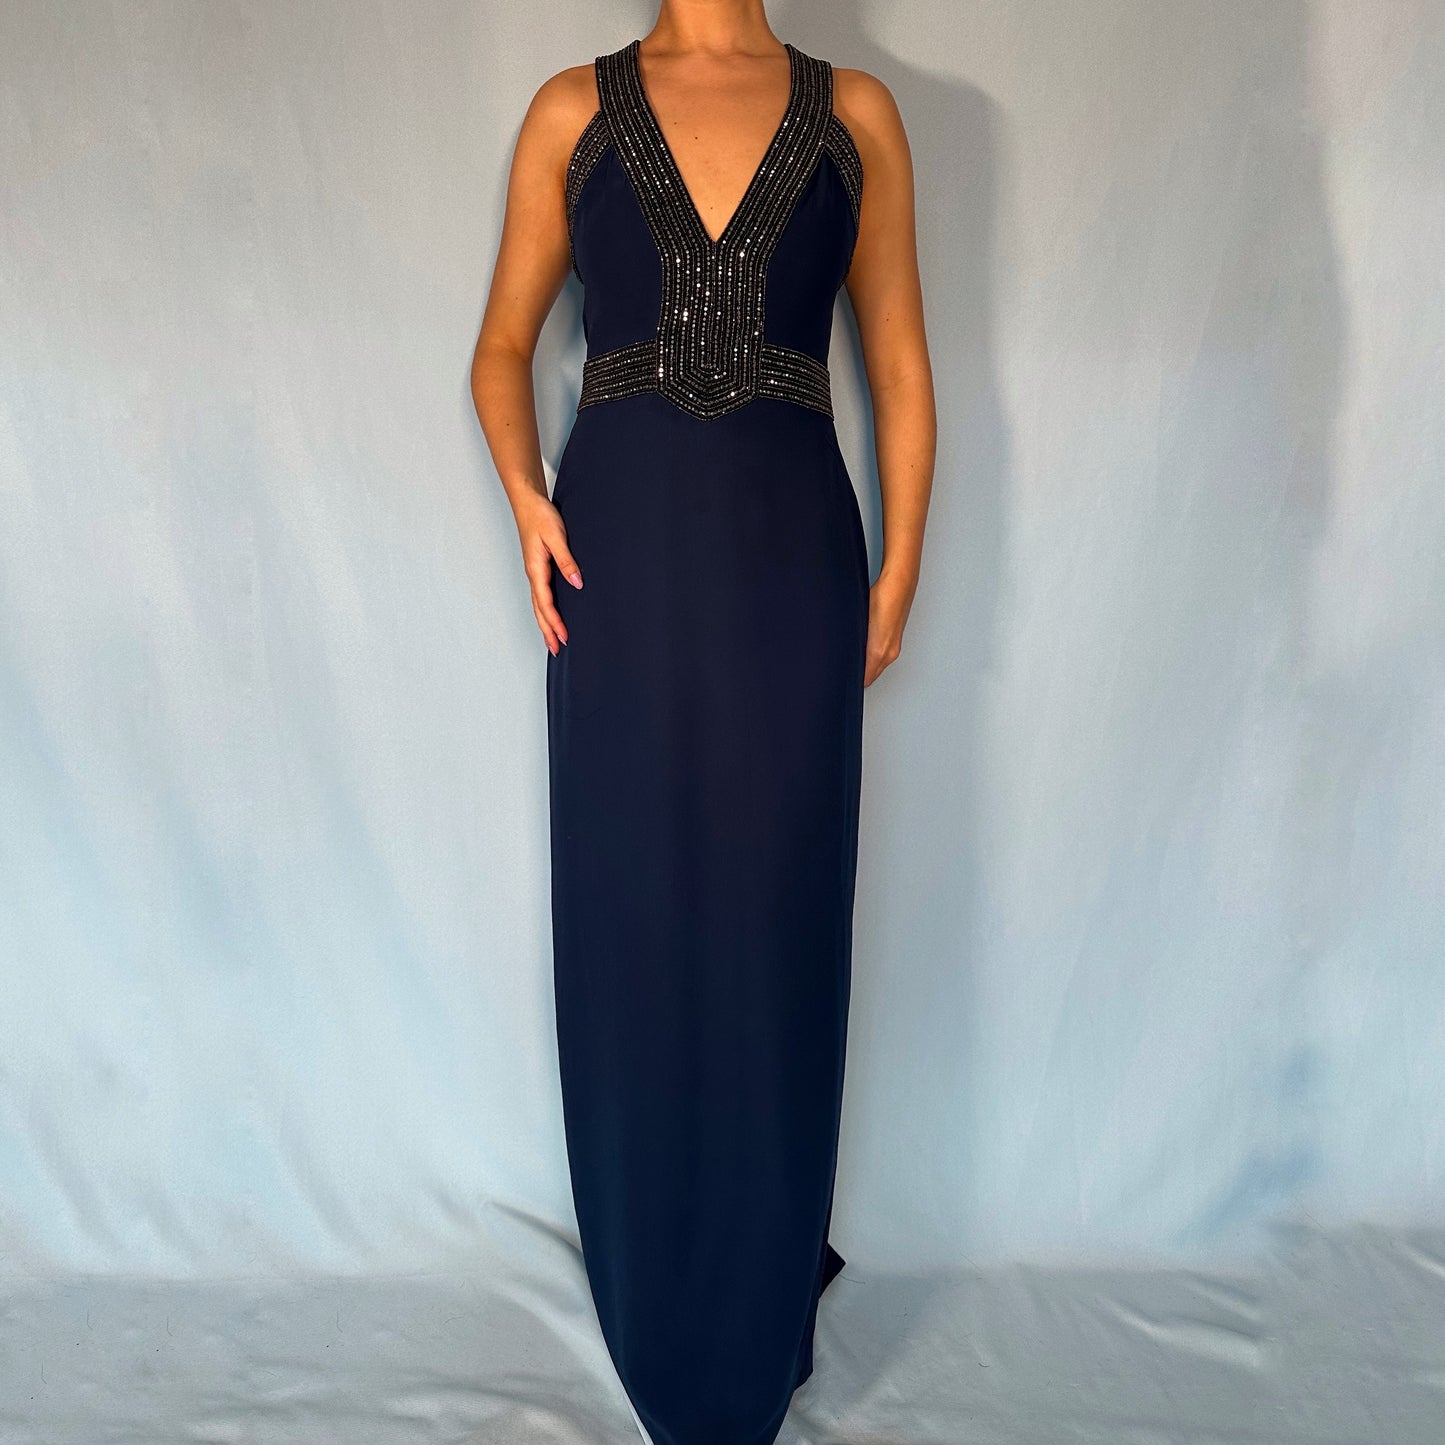 Gucci 2014 Navy Blue Embellished Gown Dress